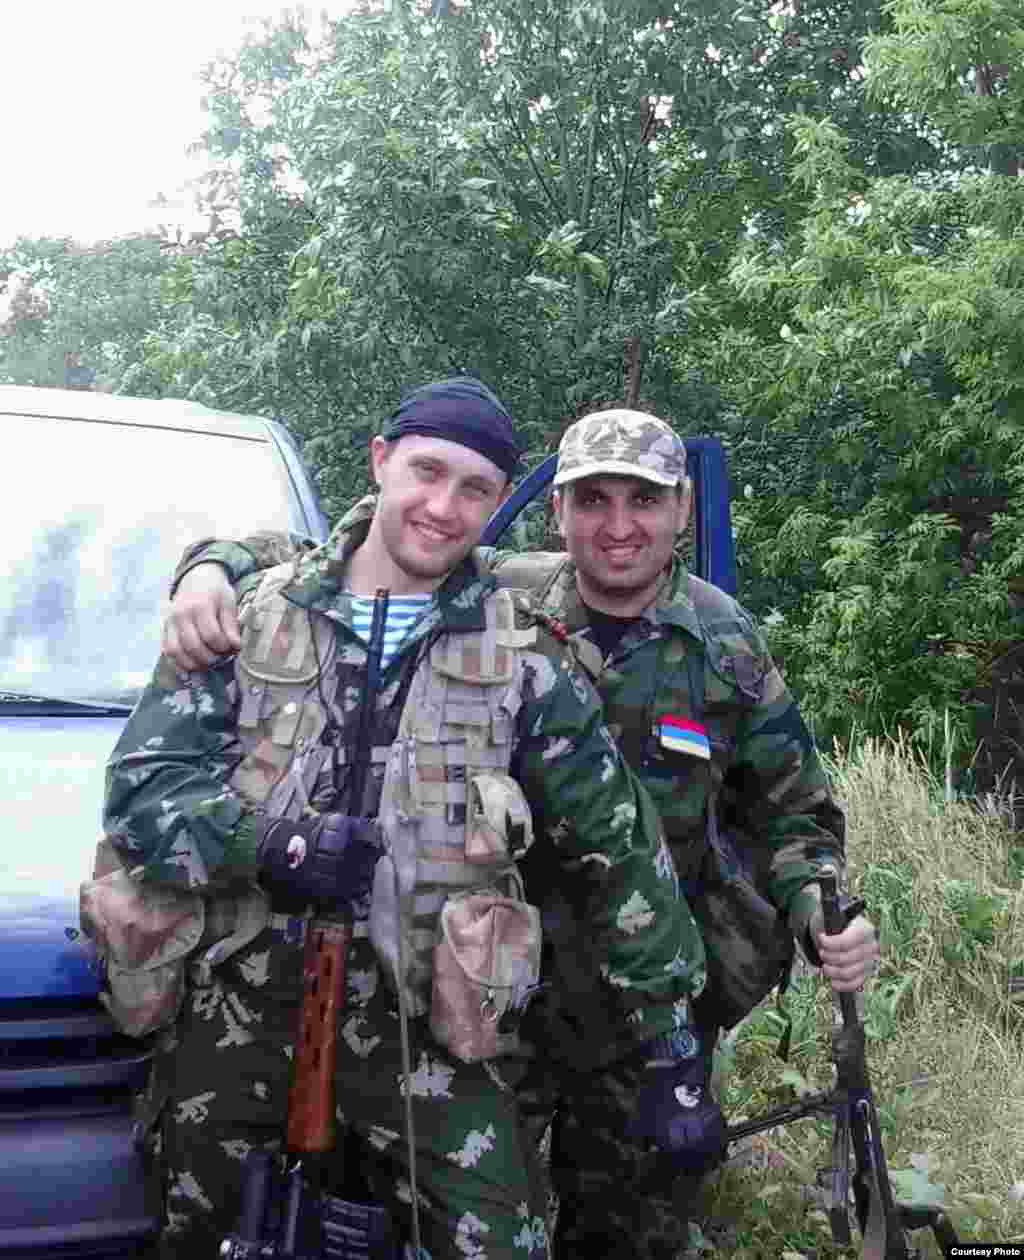 Artur Gasparyan (right) poses with a comrade from the Vostok Battalion.